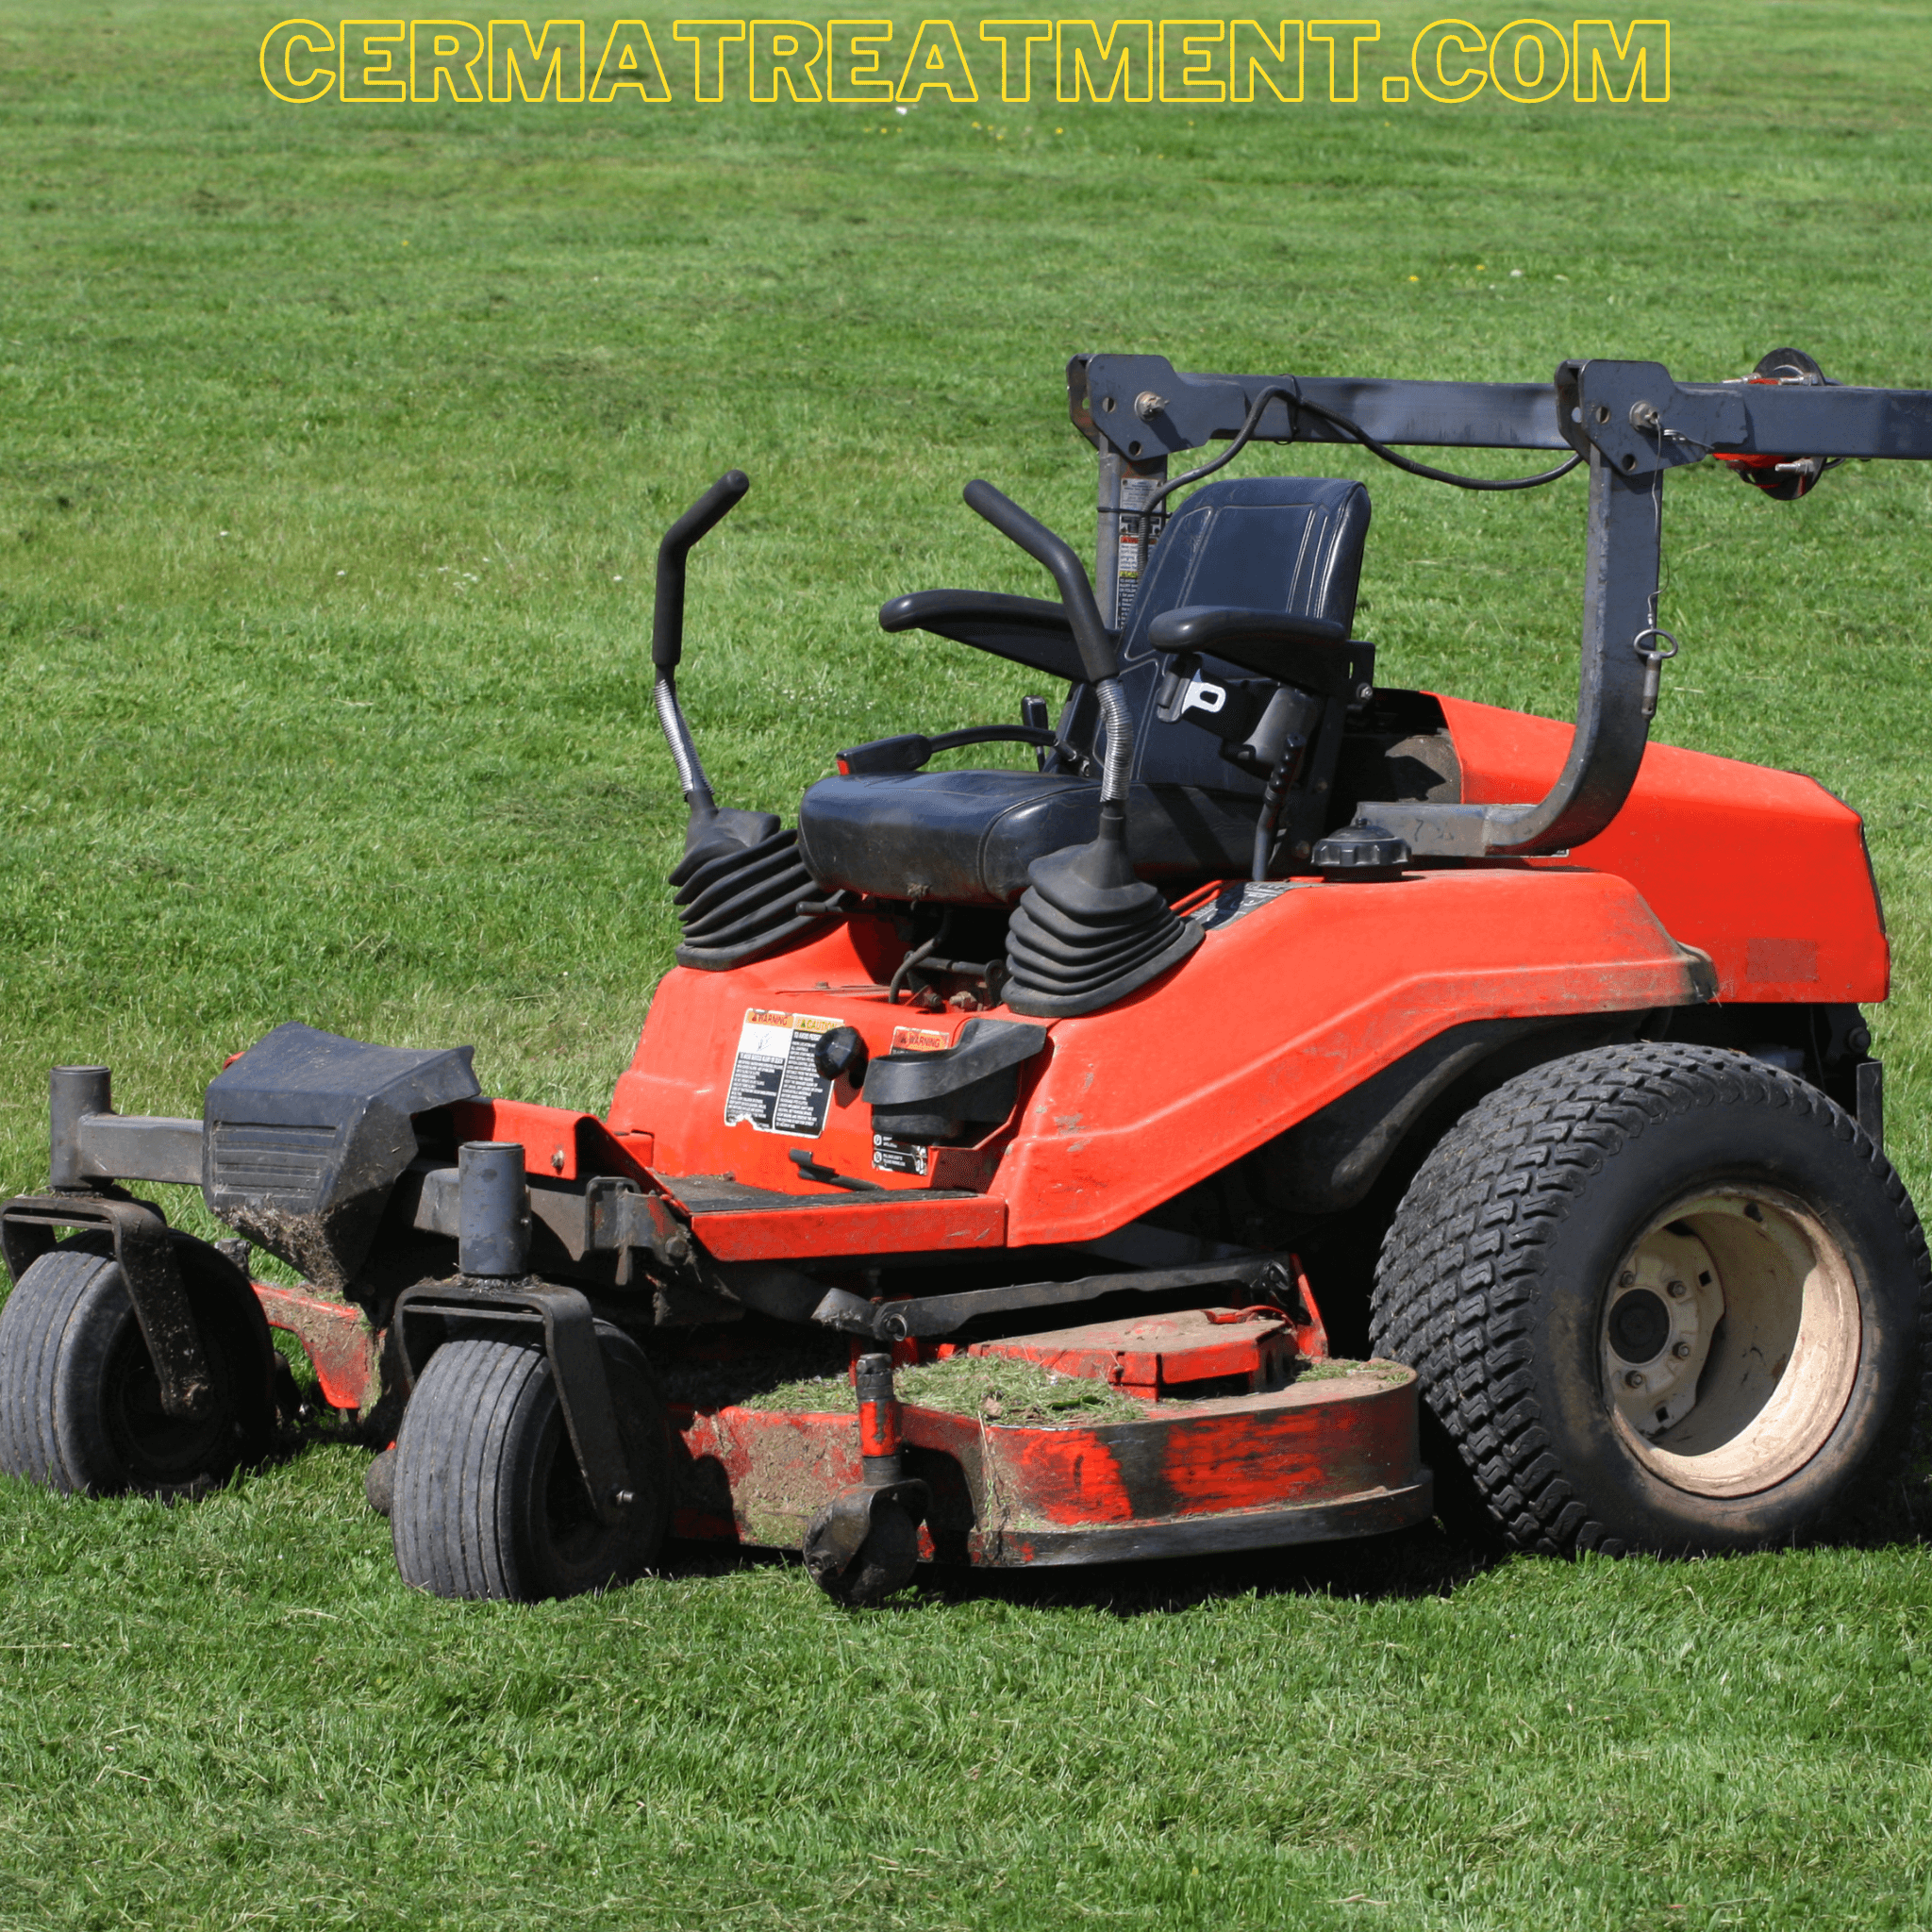 Lawn Mower Oils: Choosing the Right Lubrication for Optimal Performance